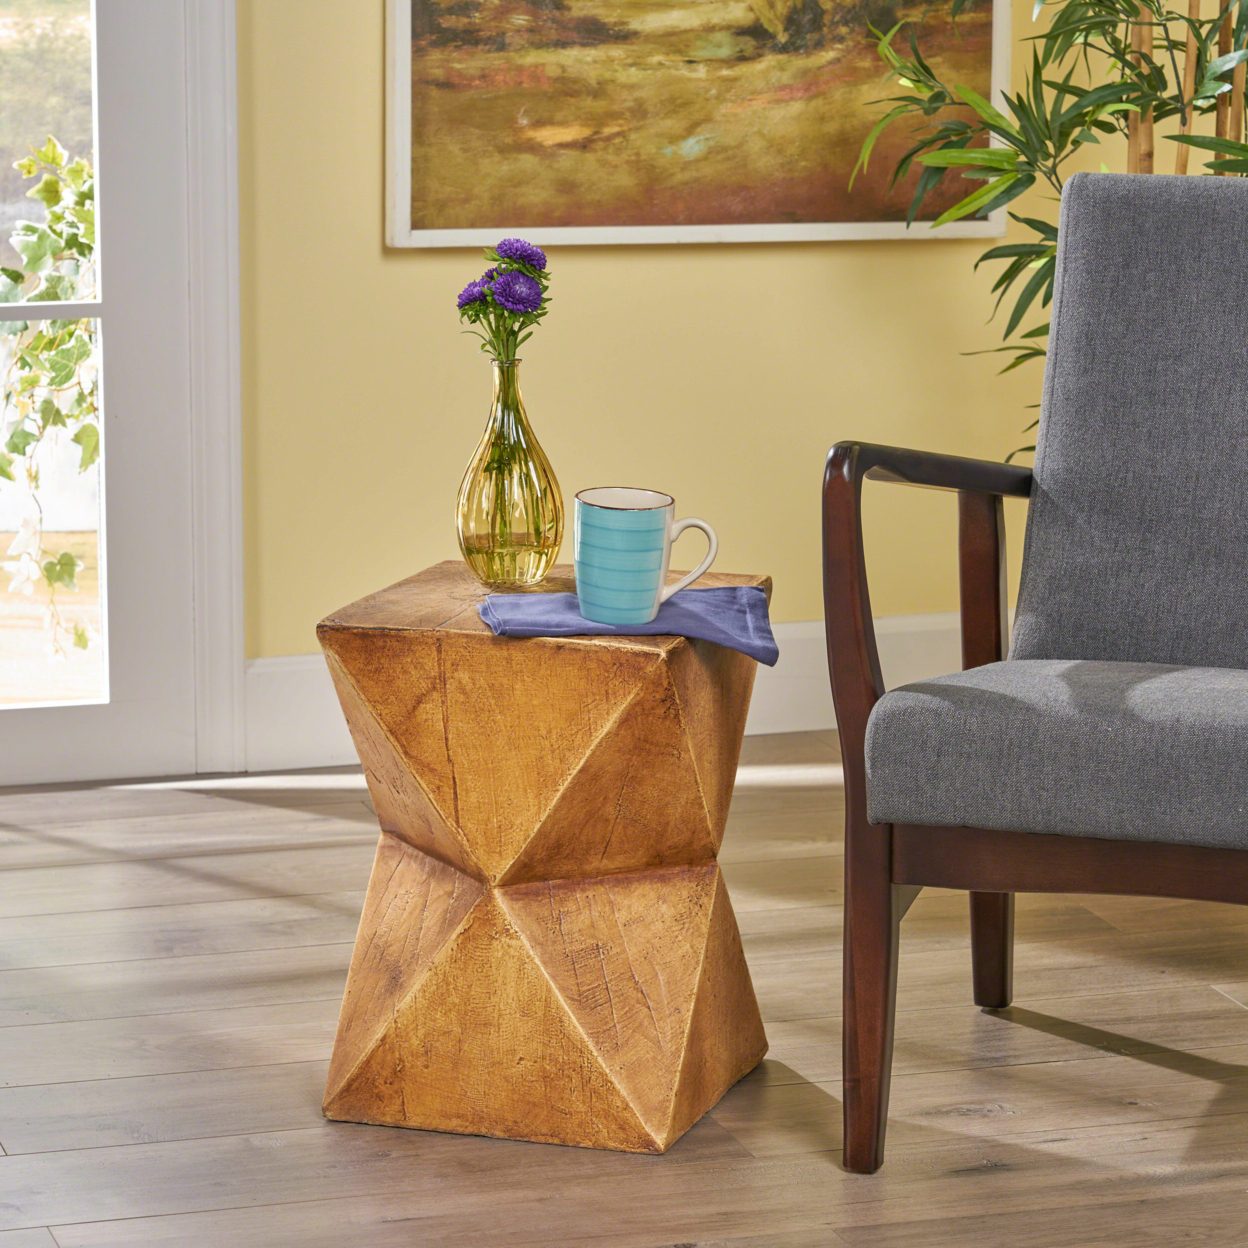 Manuel Light-Weight Concrete Accent Table - Natural